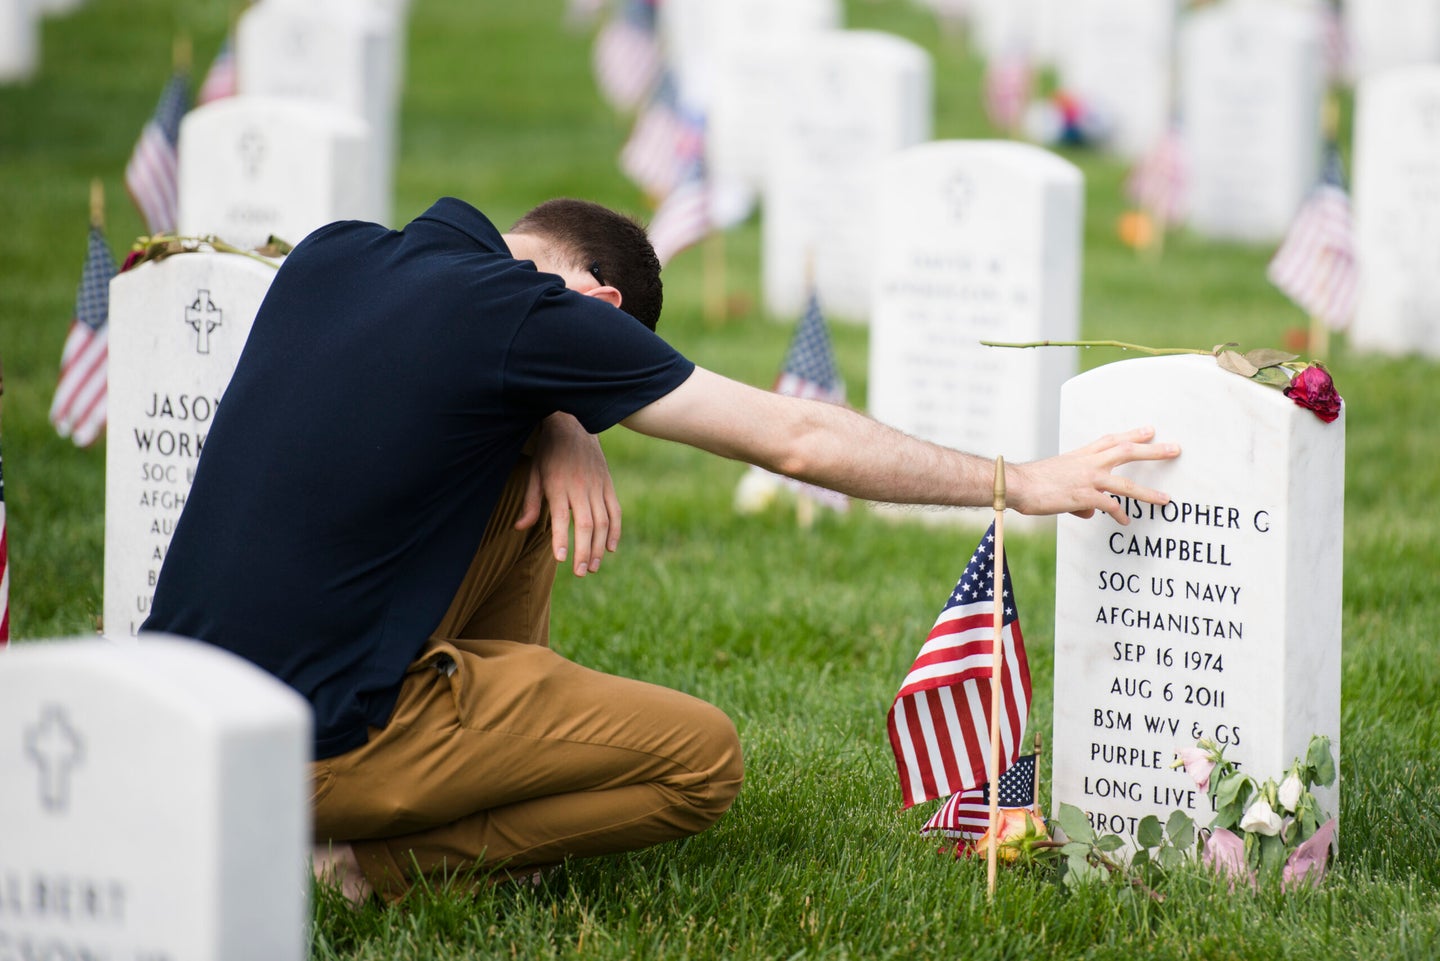 Austin Williams visits the gravesite of U.S. Navy Petty Officer 1st Class Christopher C. Campbell in Section 60 of Arlington National Cemetery on Memorial Day, May 30, 2016. Campbell was one of 30 Americans killed when a CH-47 Chinook helicopter, with the call sign Extortion 17, crashed in Afghanistan. 